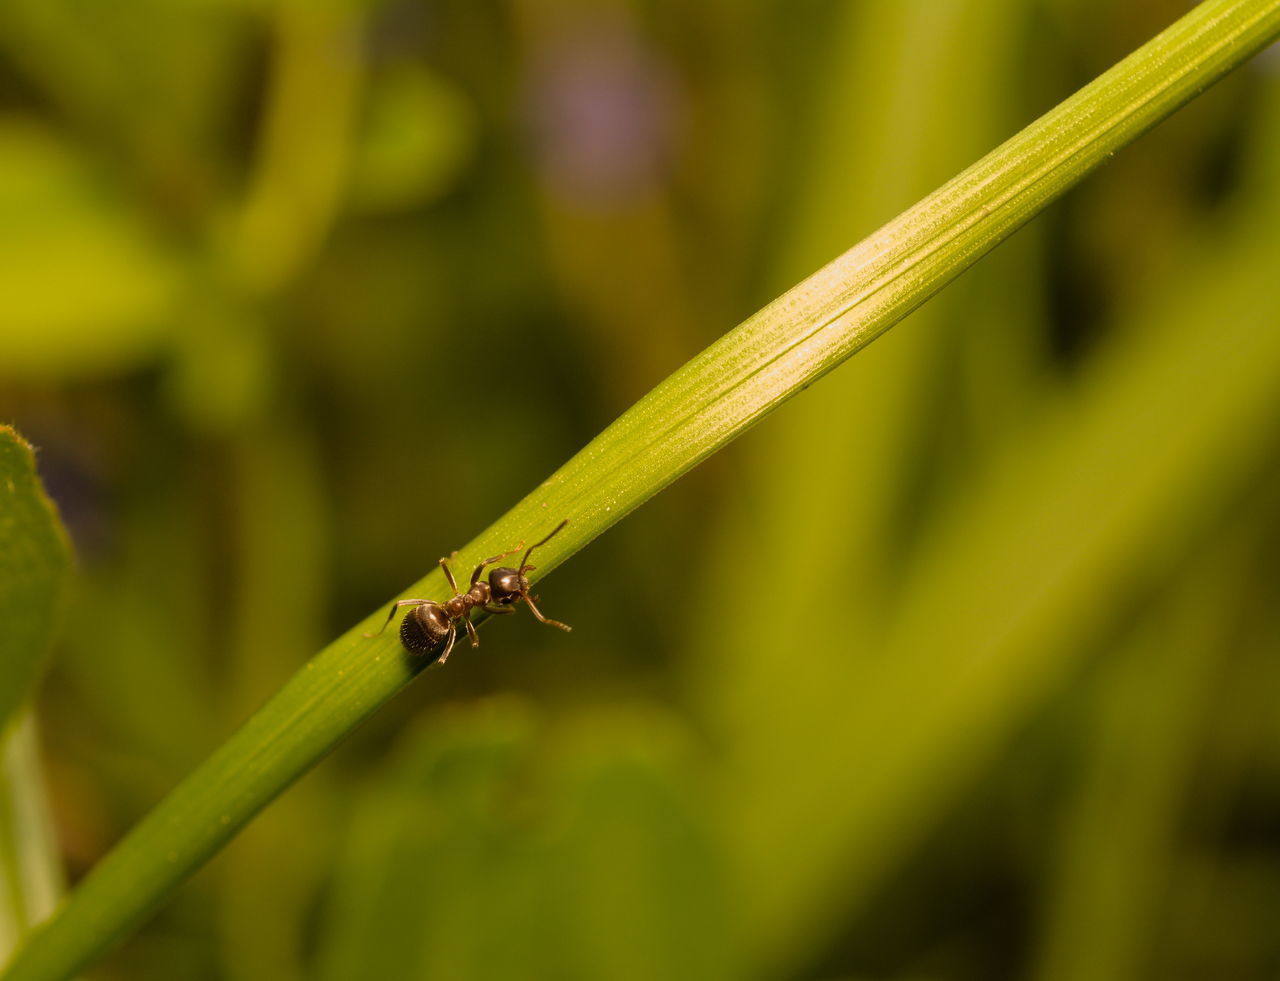 CLOSE-UP OF ANT ON PLANT